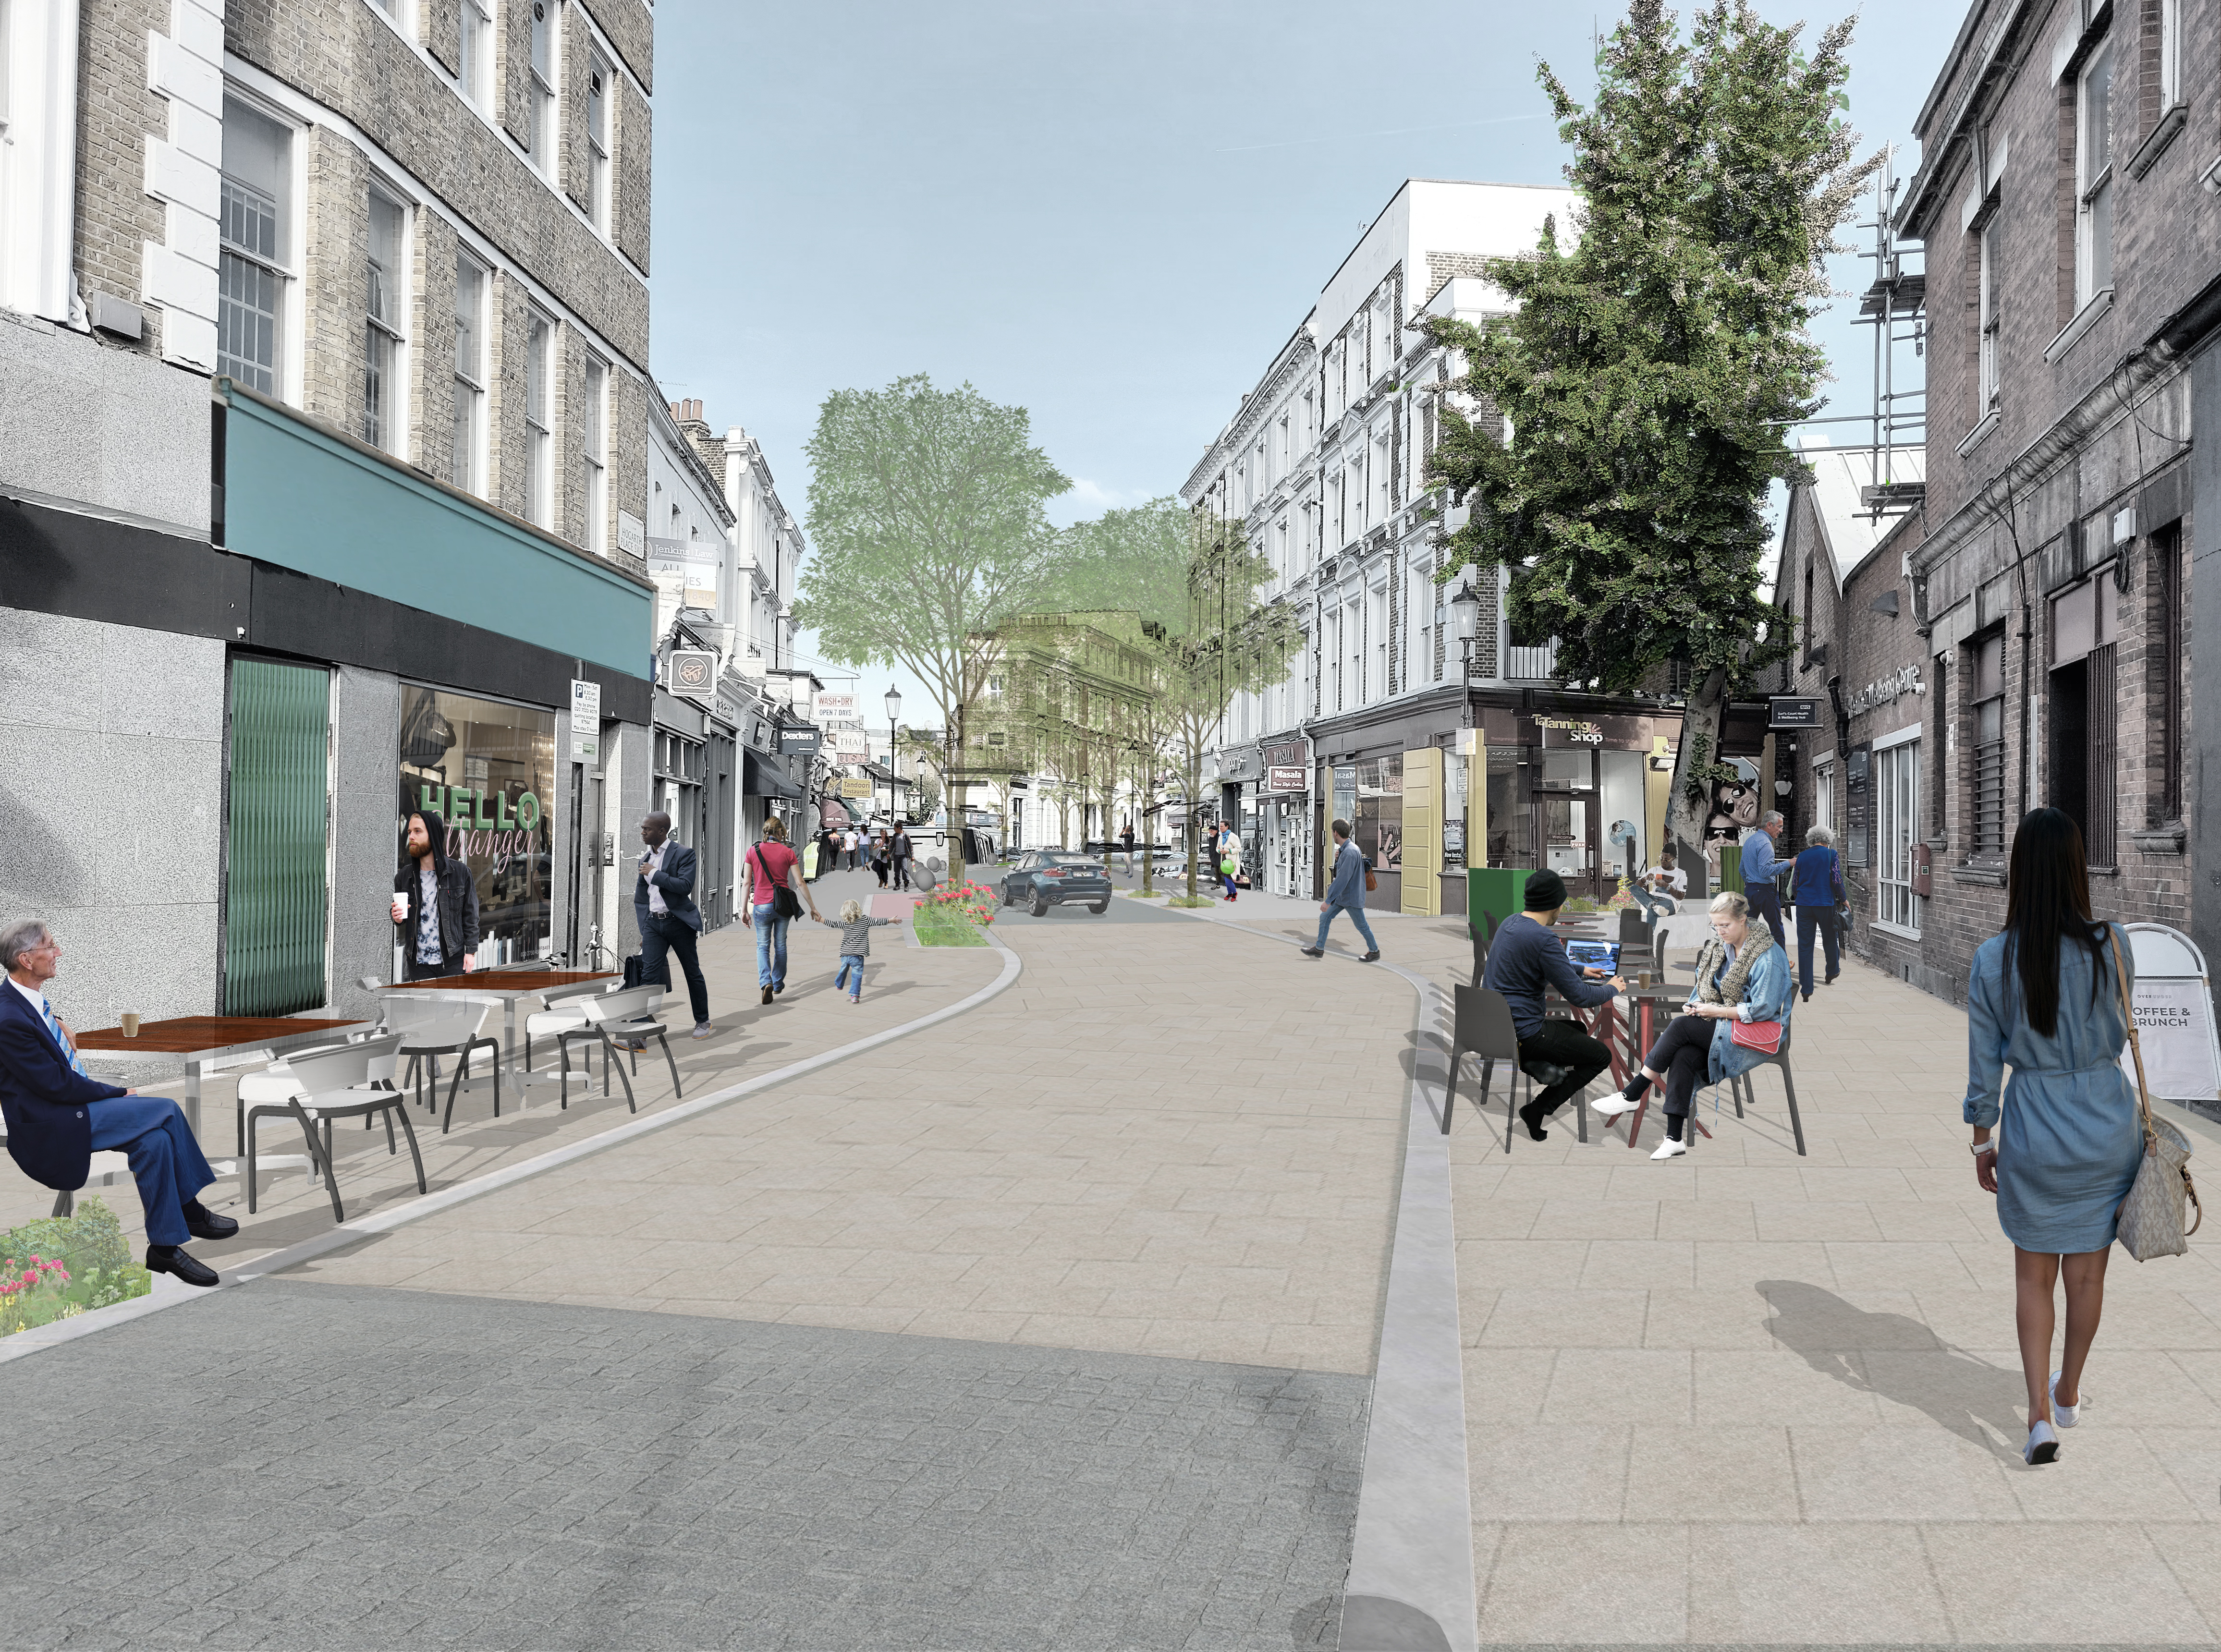 A digital artists impression of Hogarth Road showing the proposed changes